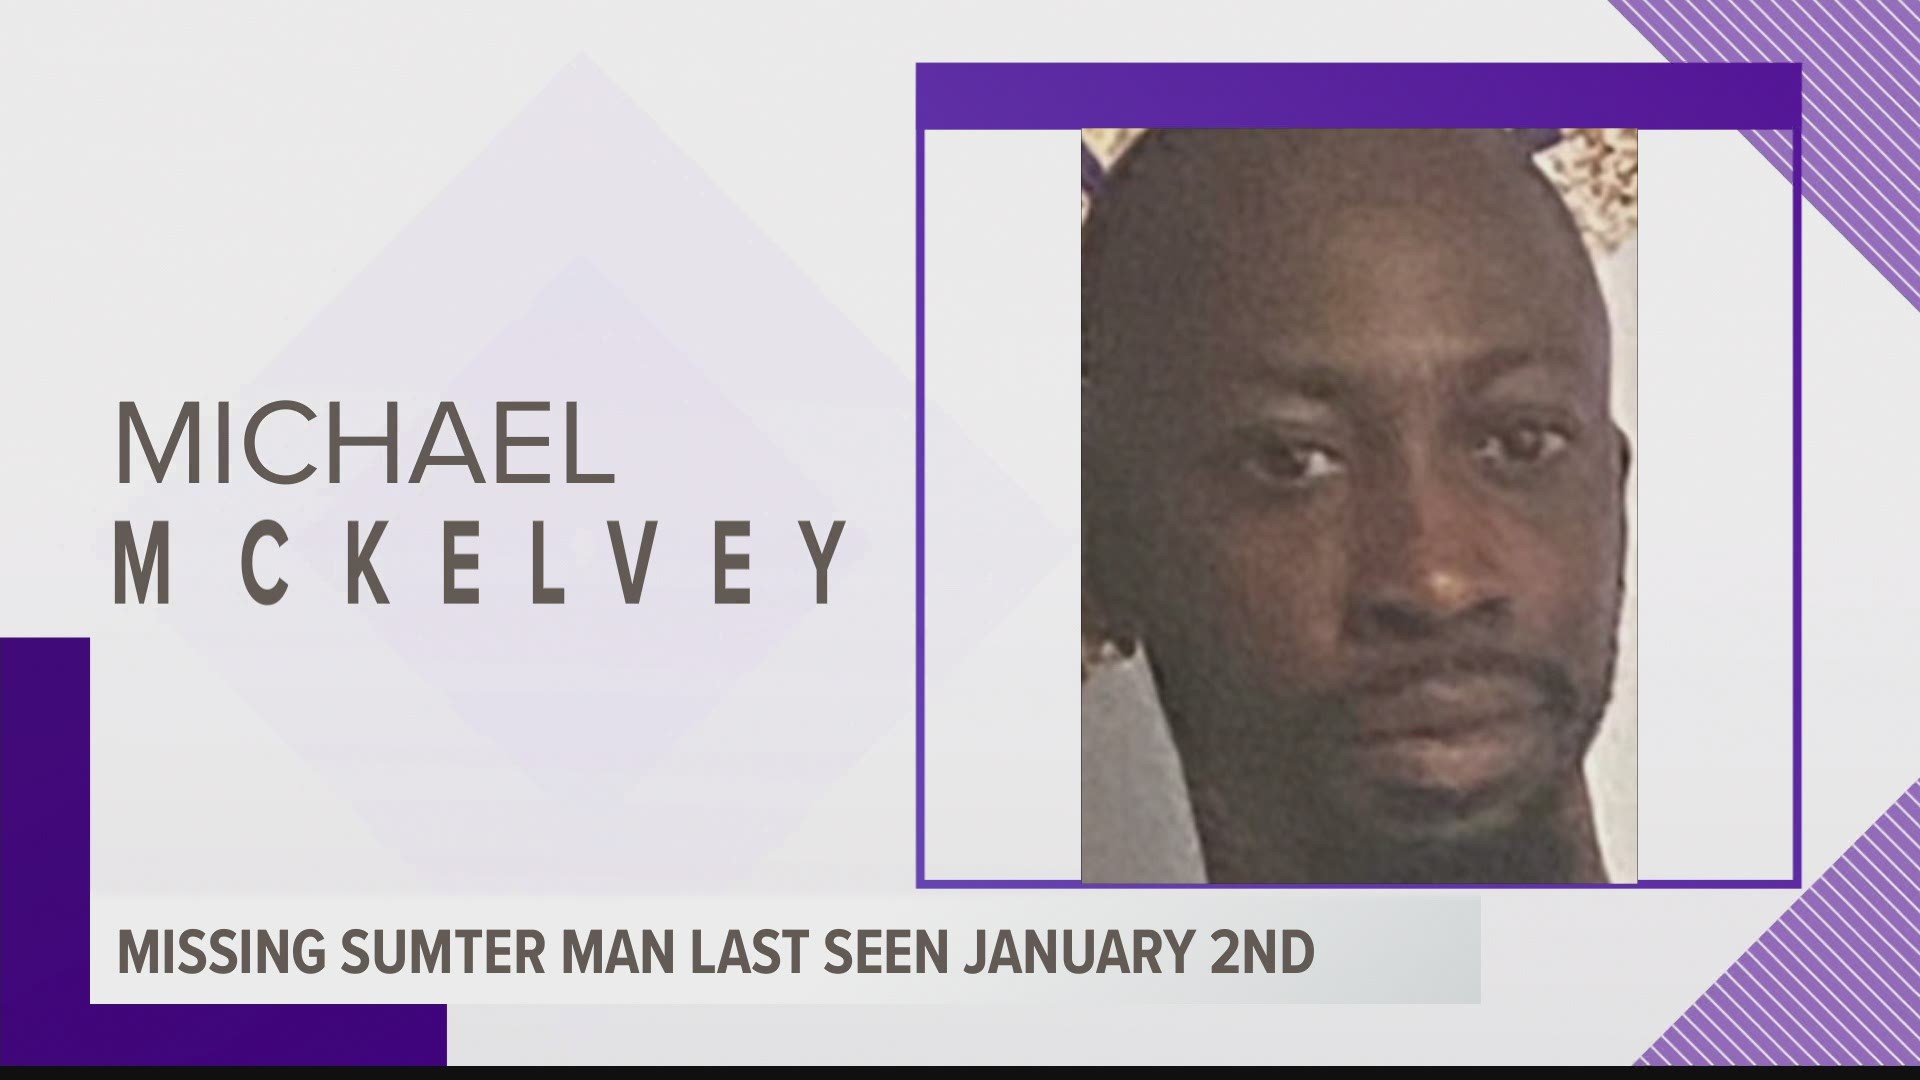 McKelvey, who is from Moncks Corner and does not have a vehicle, was last seen on Jan. 2 in Sumter.